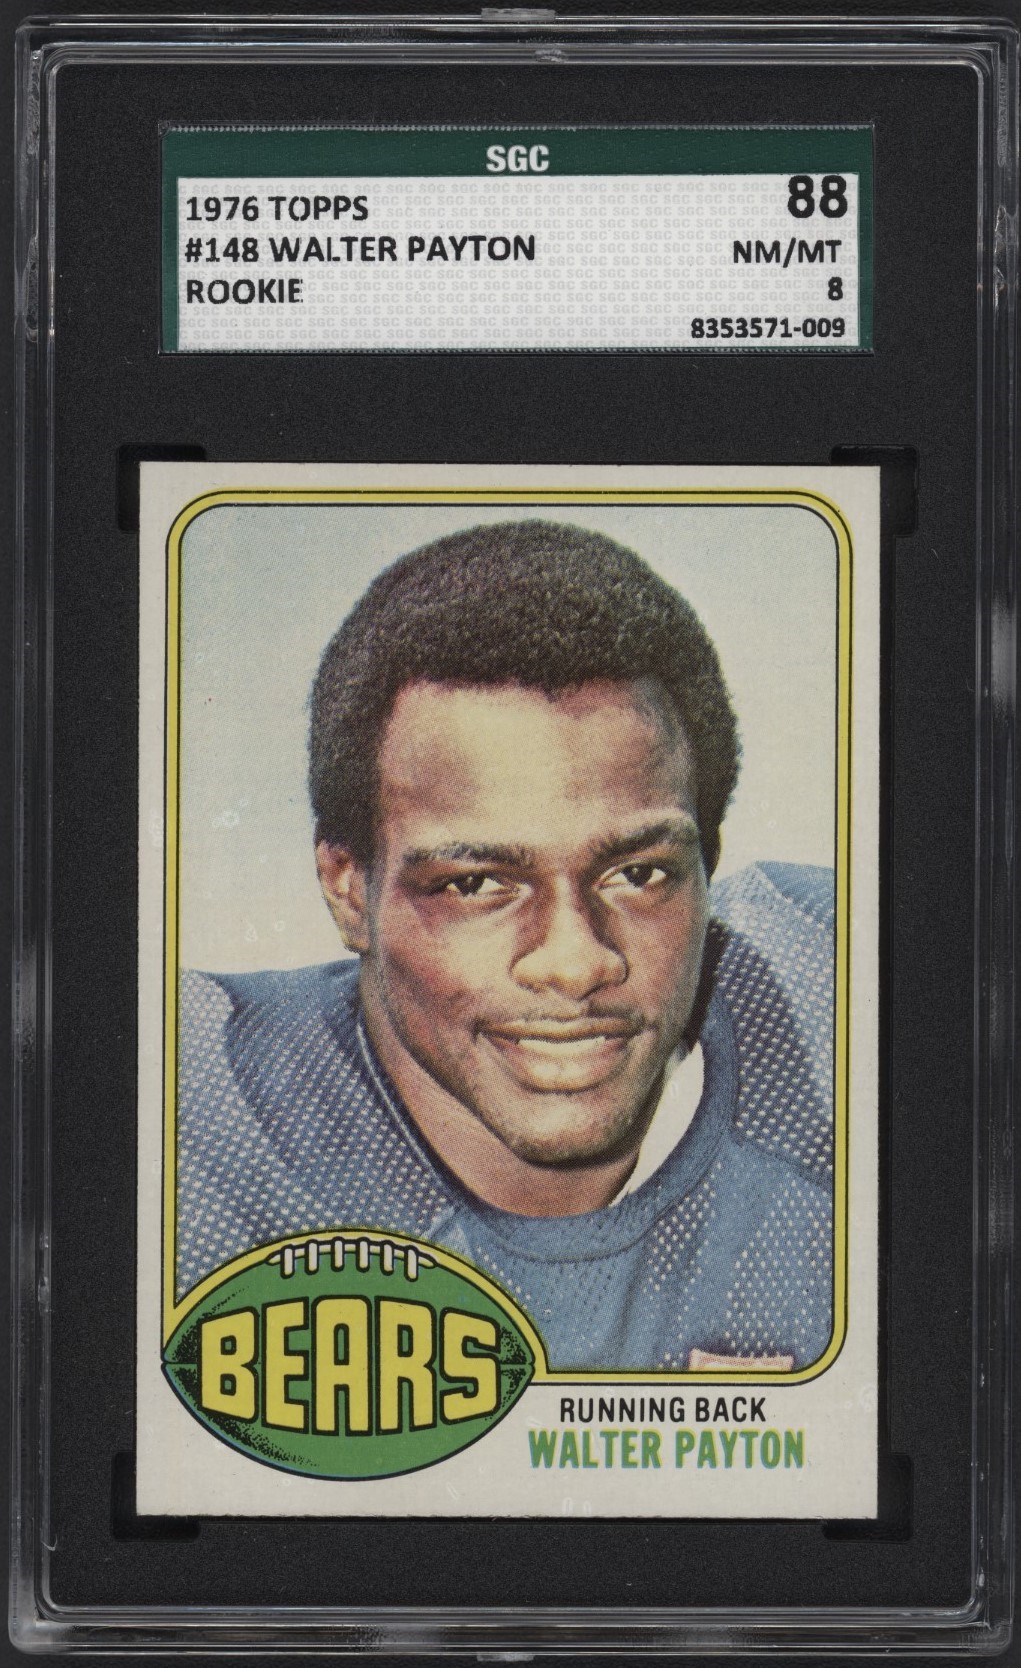 Baseball and Trading Cards - 1976 Topps Football Complete Set (528) with Walter Payton RC SGC 88